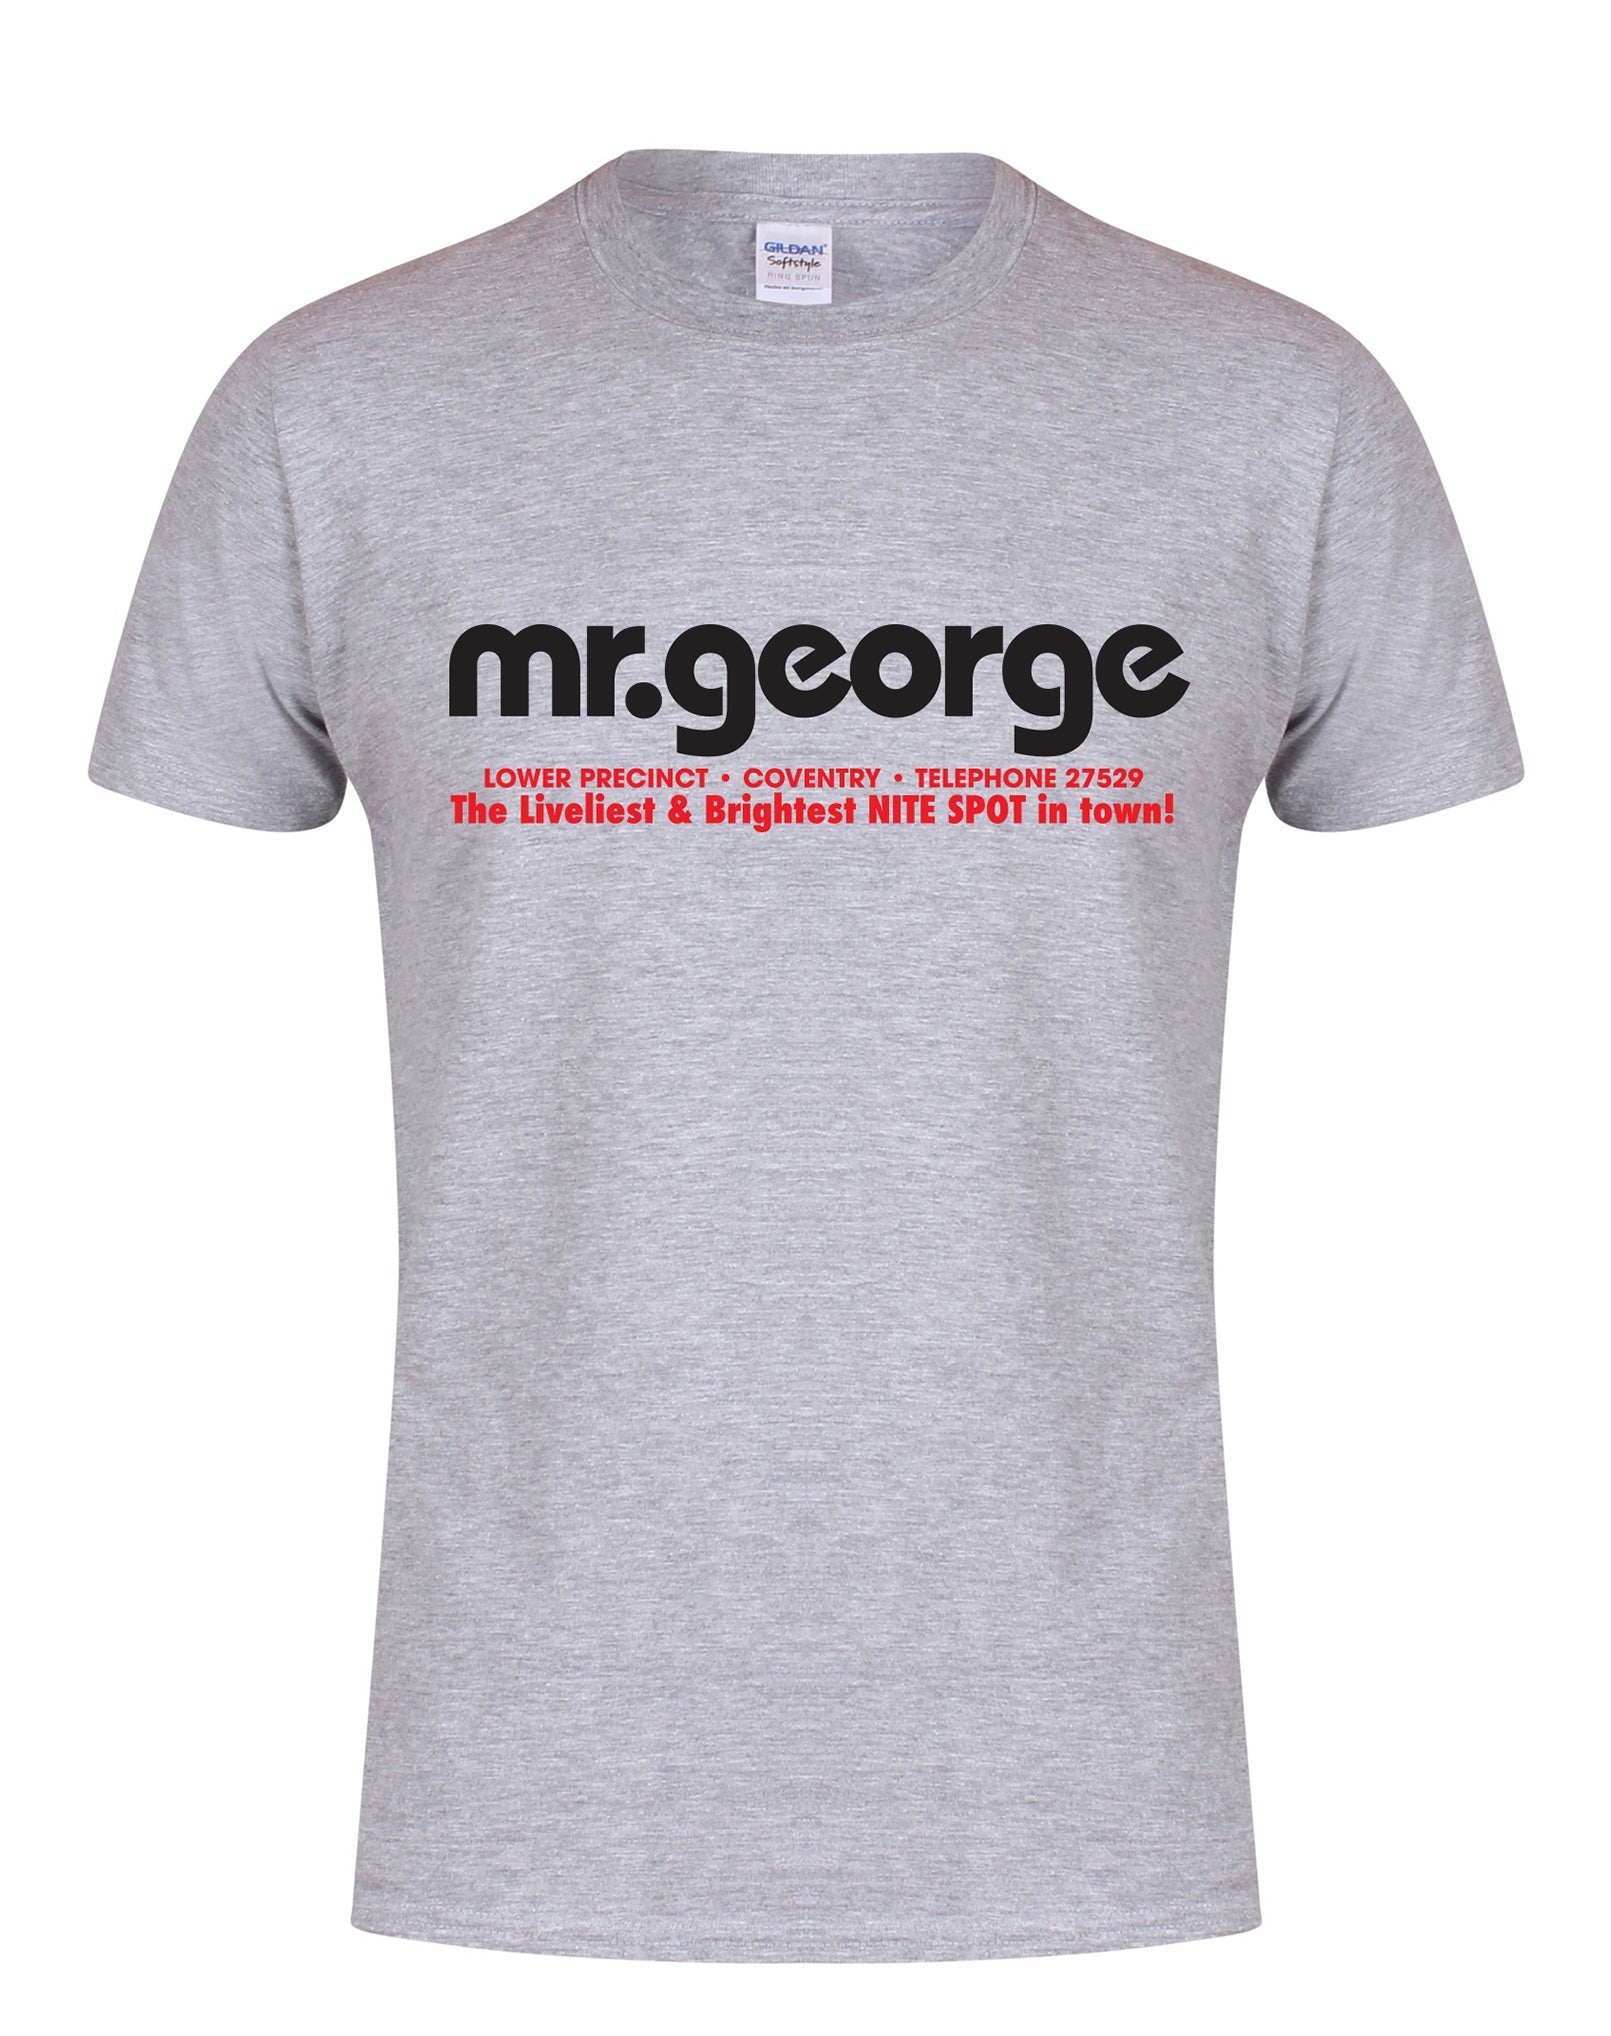 Mr George unisex fit T-shirt - various colours - Dirty Stop Outs